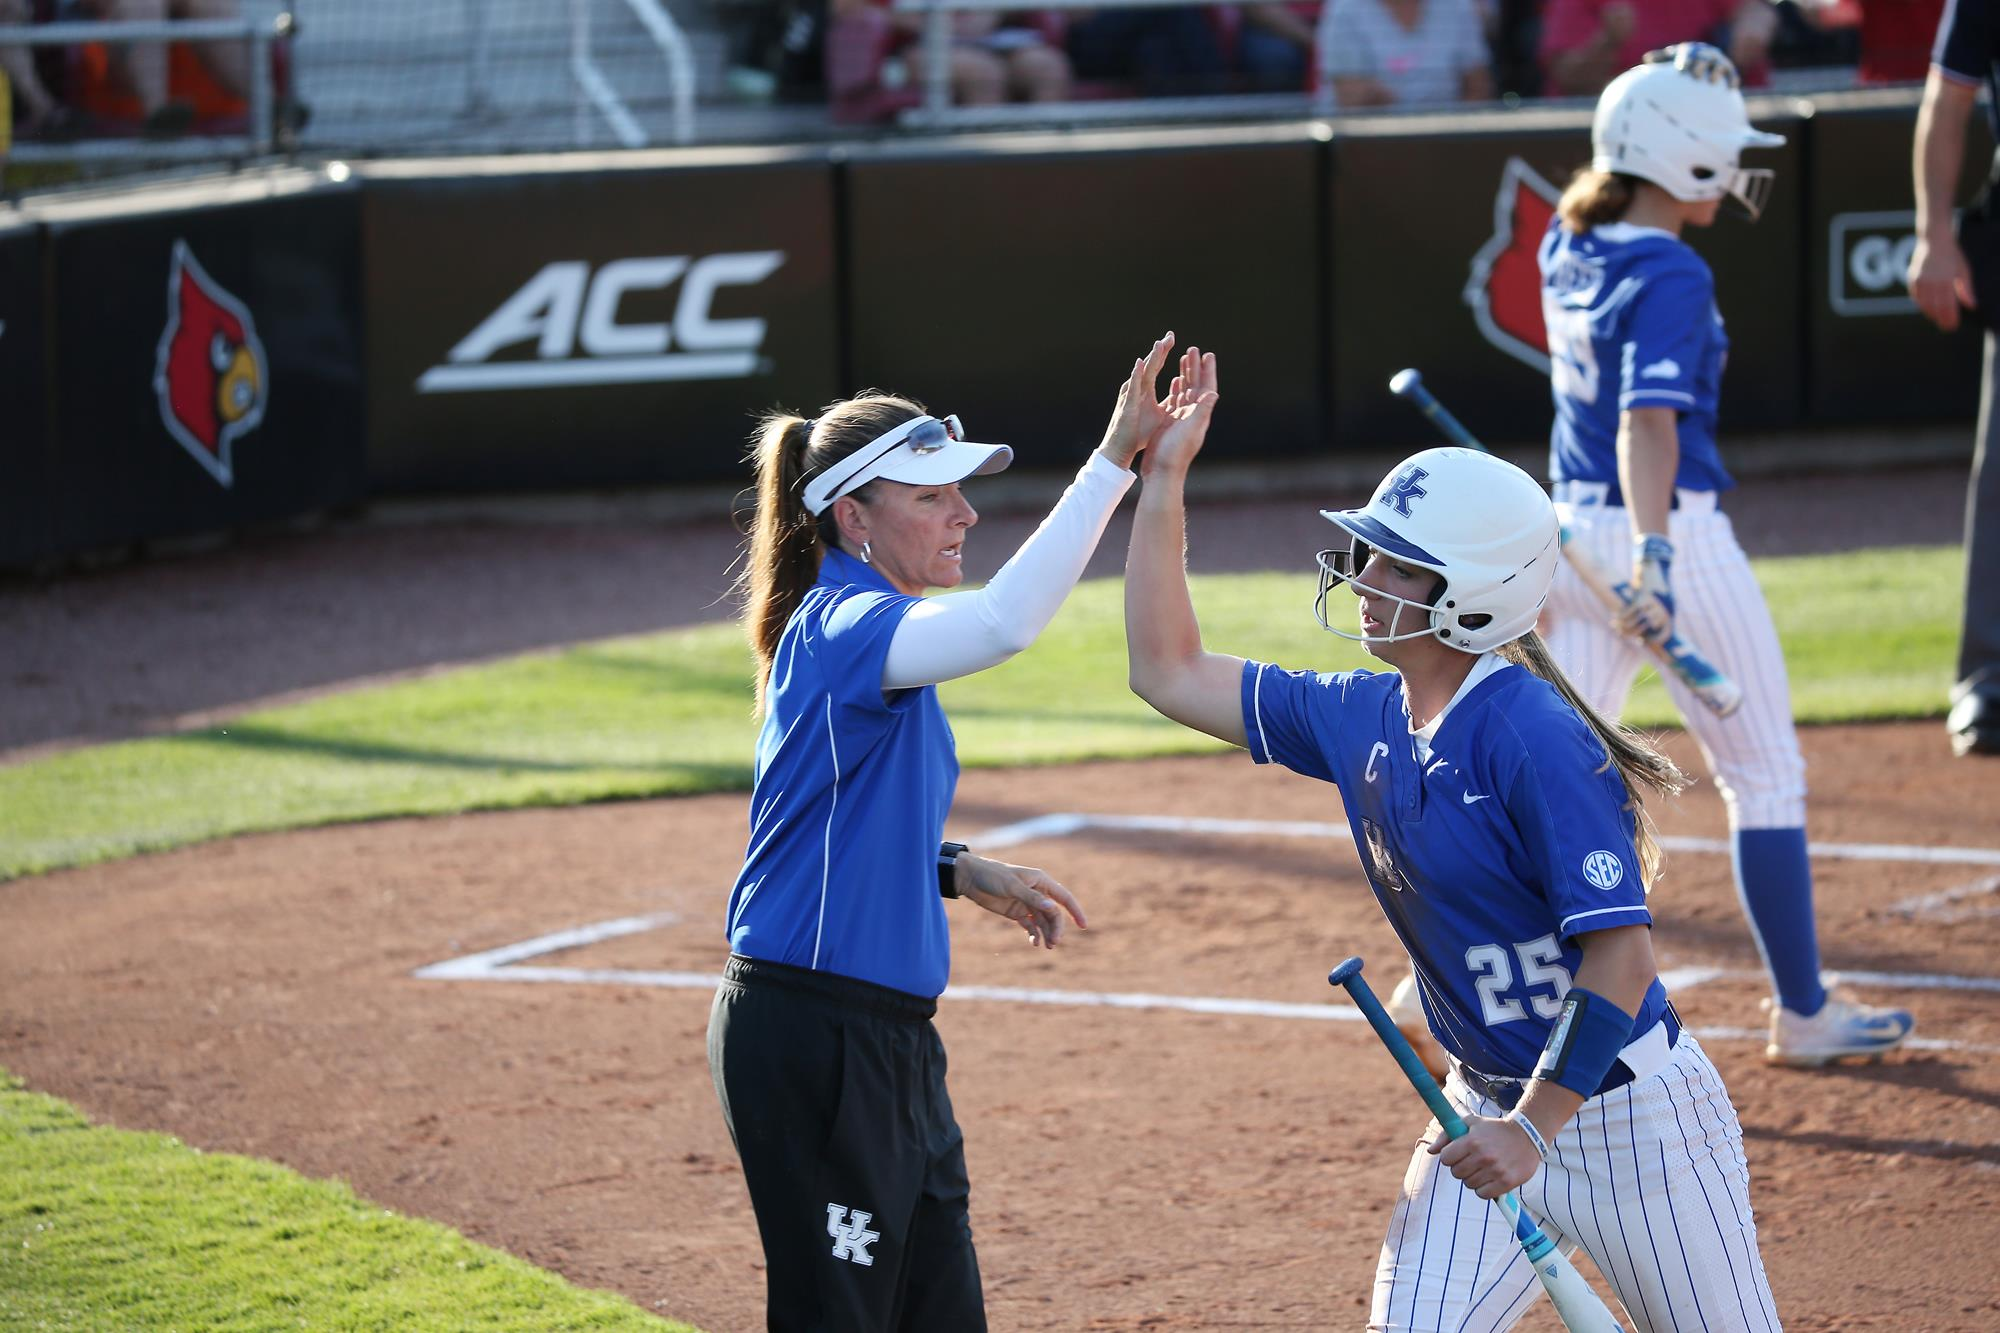 Vick and Cheek’s Trio or RBI Send Kentucky Past Indiana, 15-2